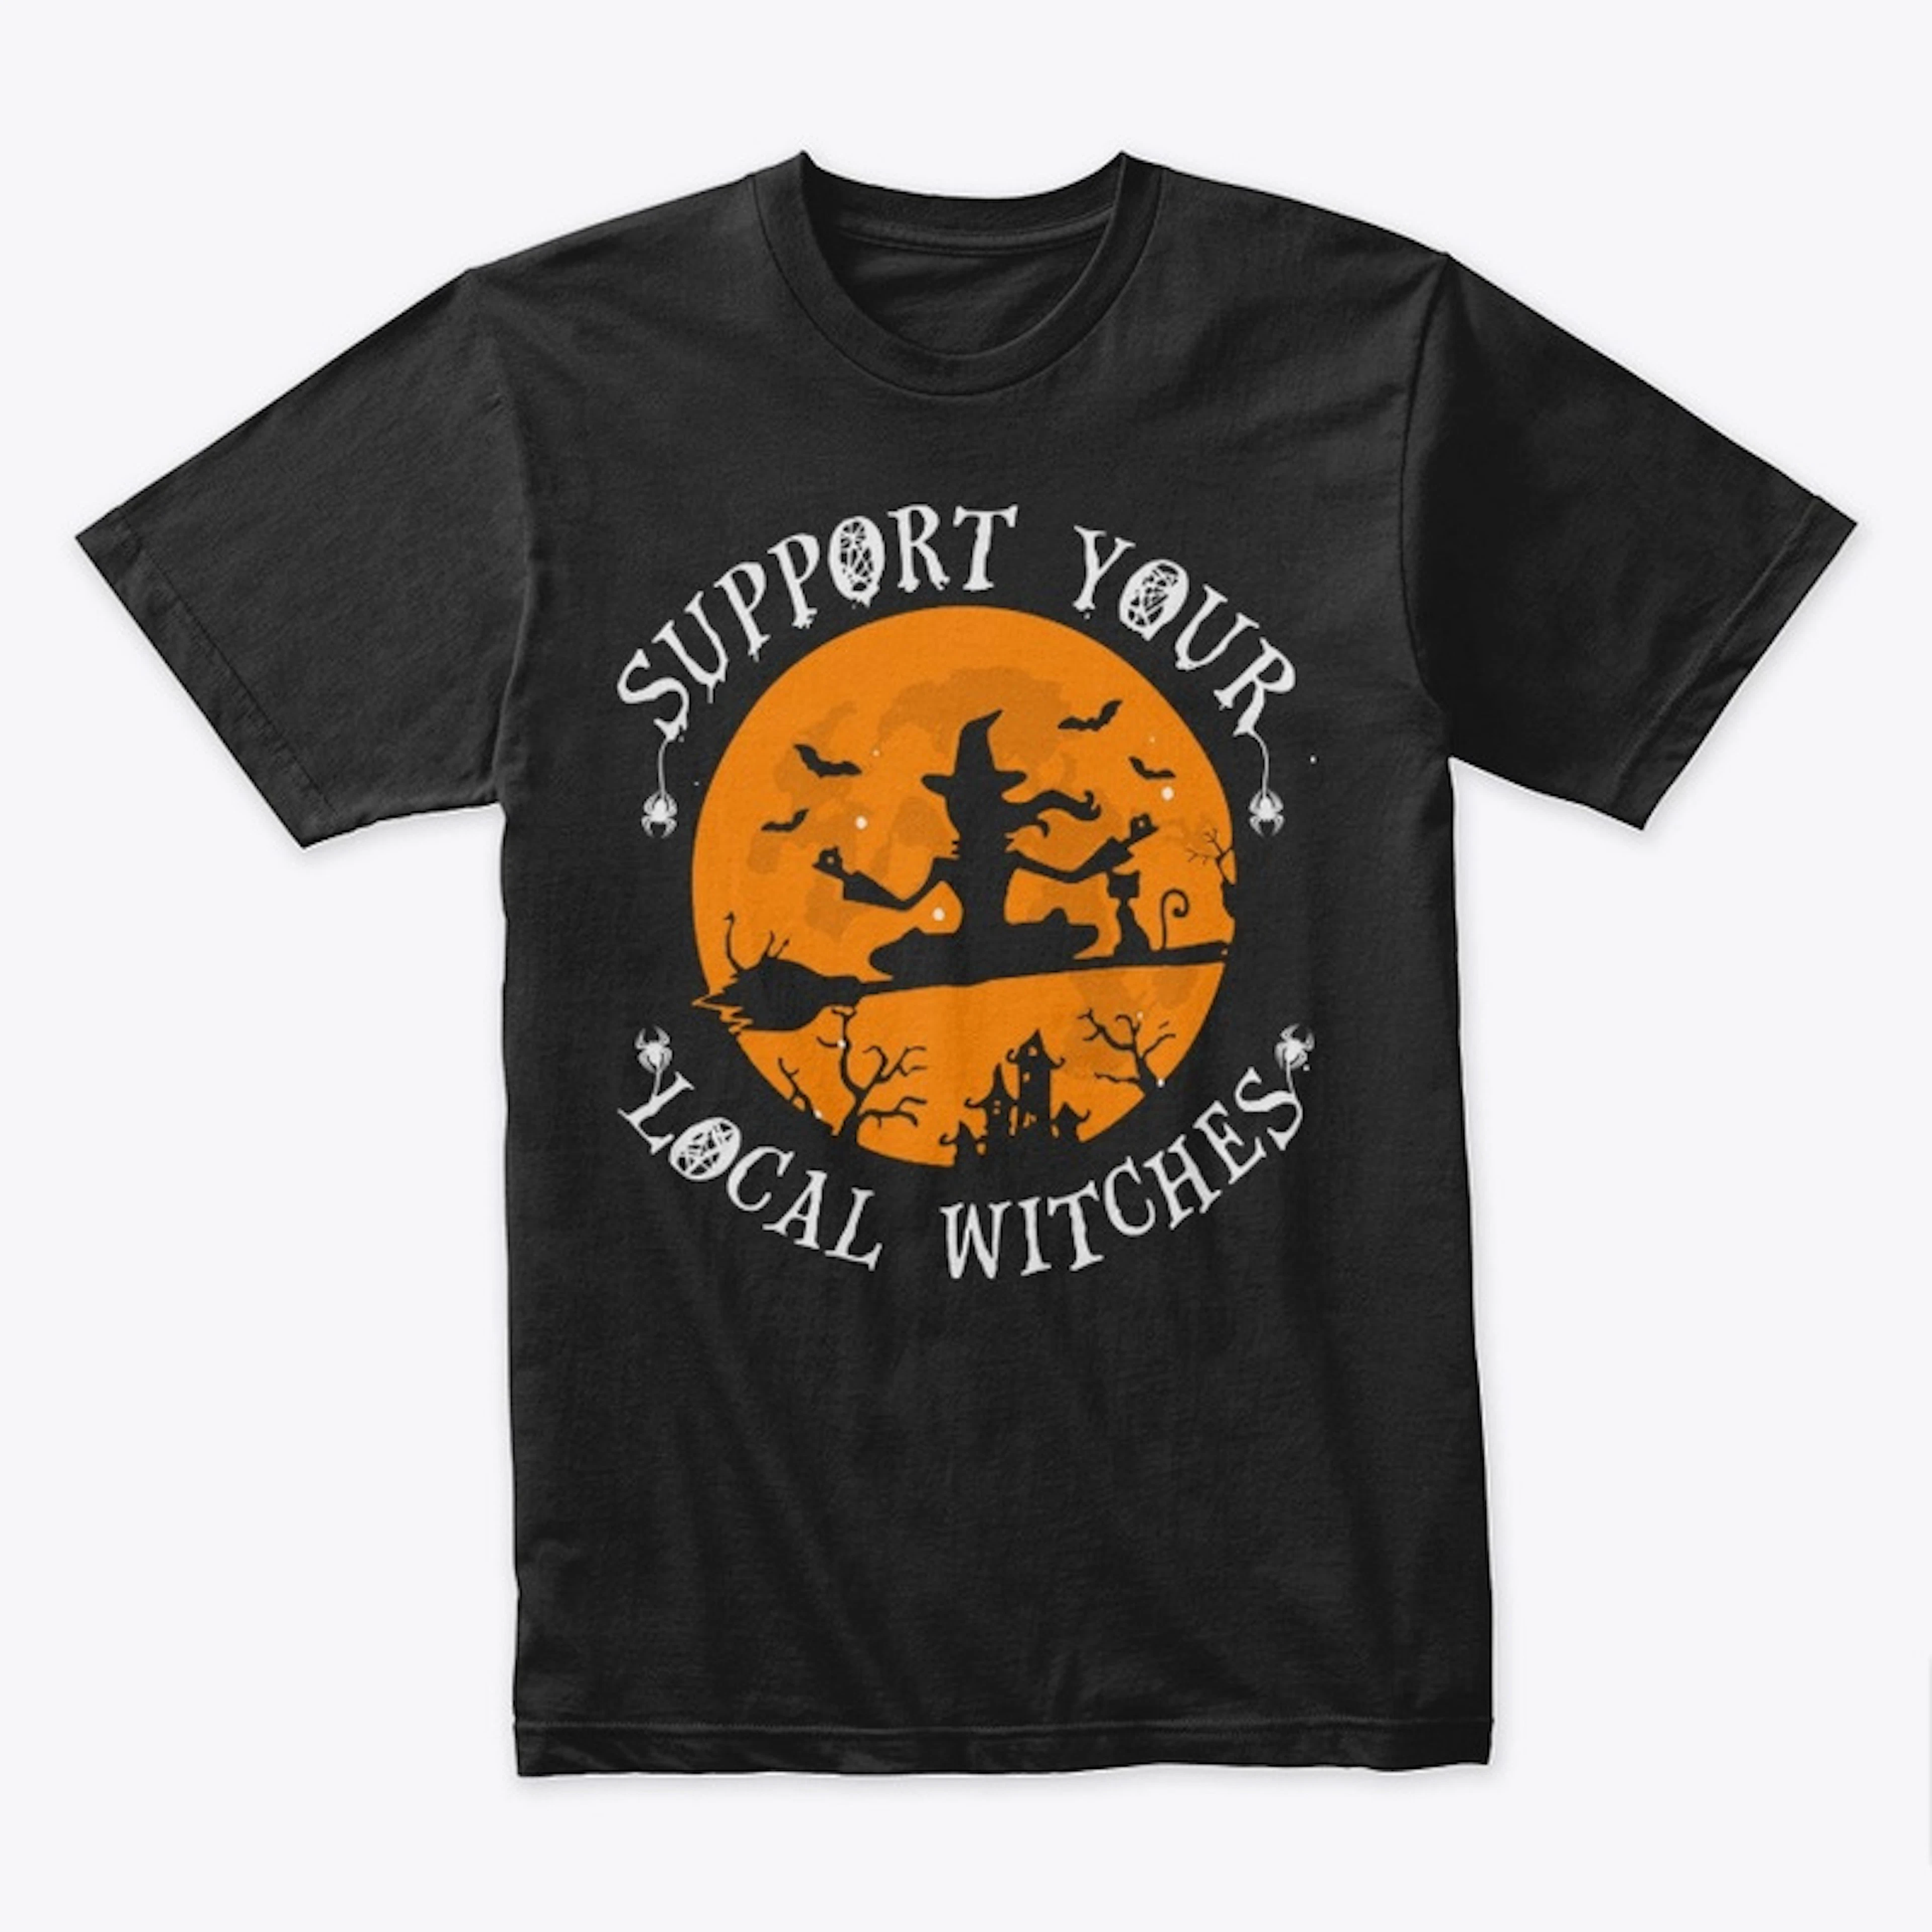 Support Your Local Witches  